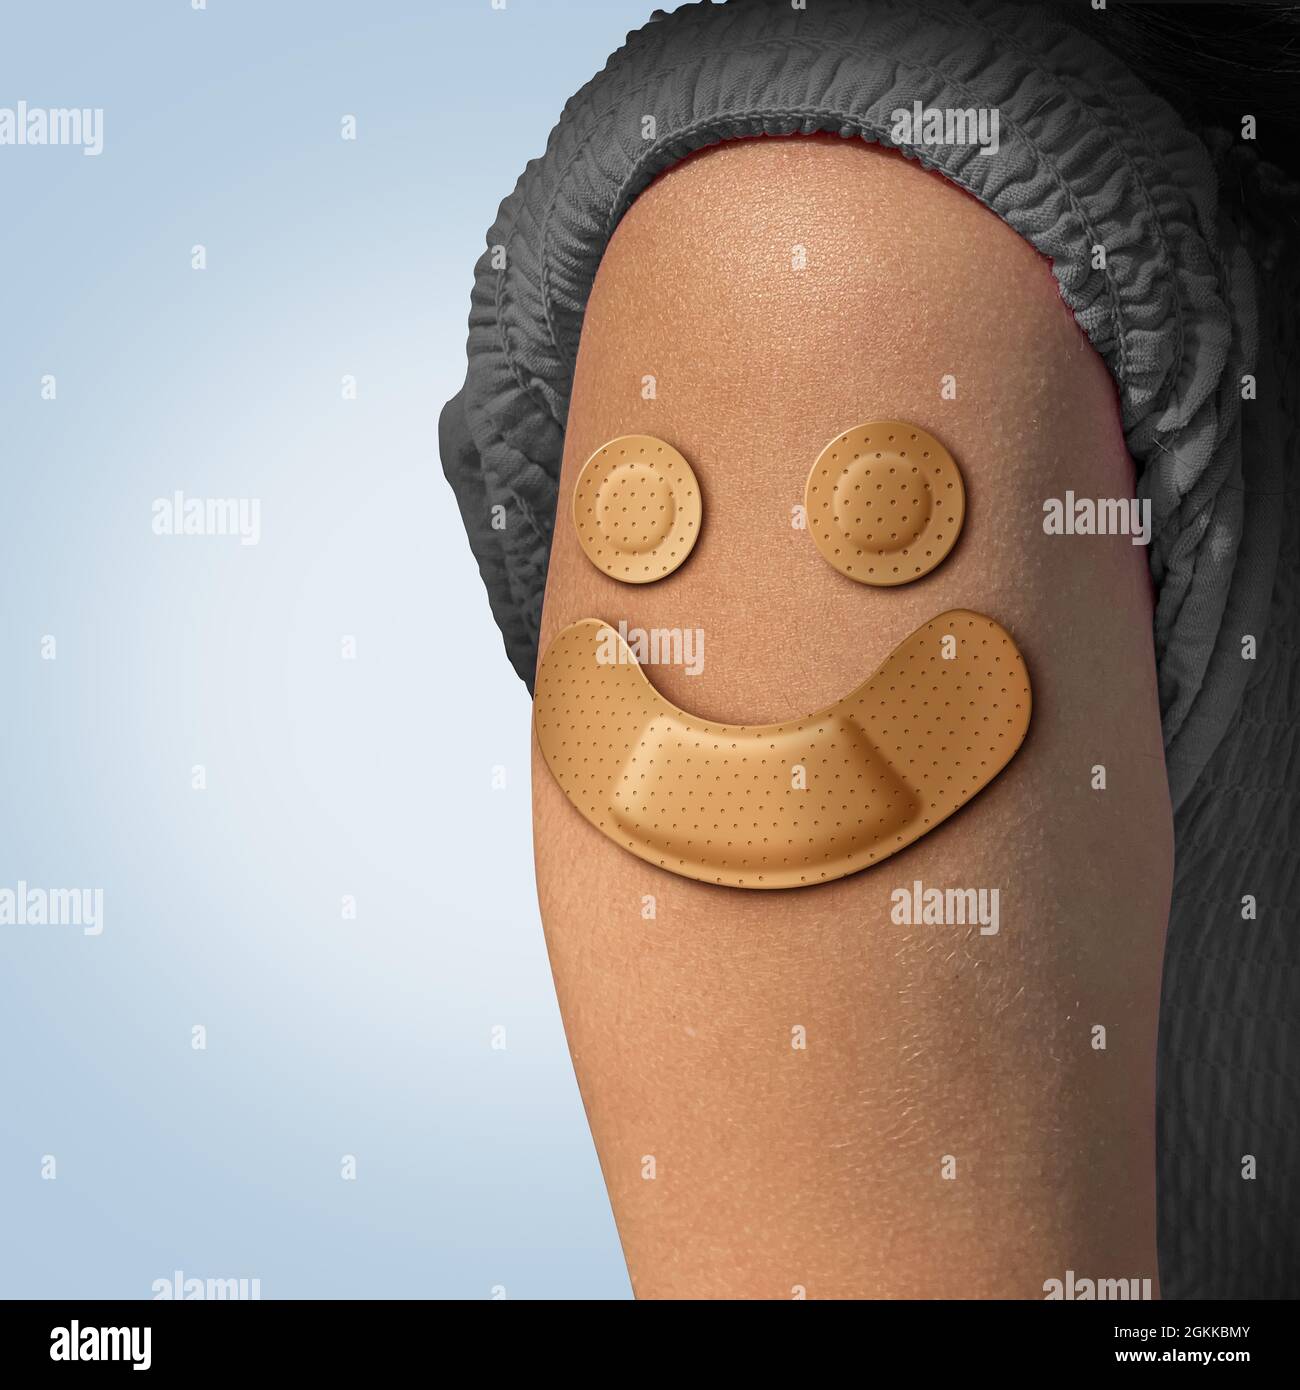 Vaccination success or influenza vaccine immunization for covid prevention treatment as adhesive bandages shaped as a smiling face representing. Stock Photo